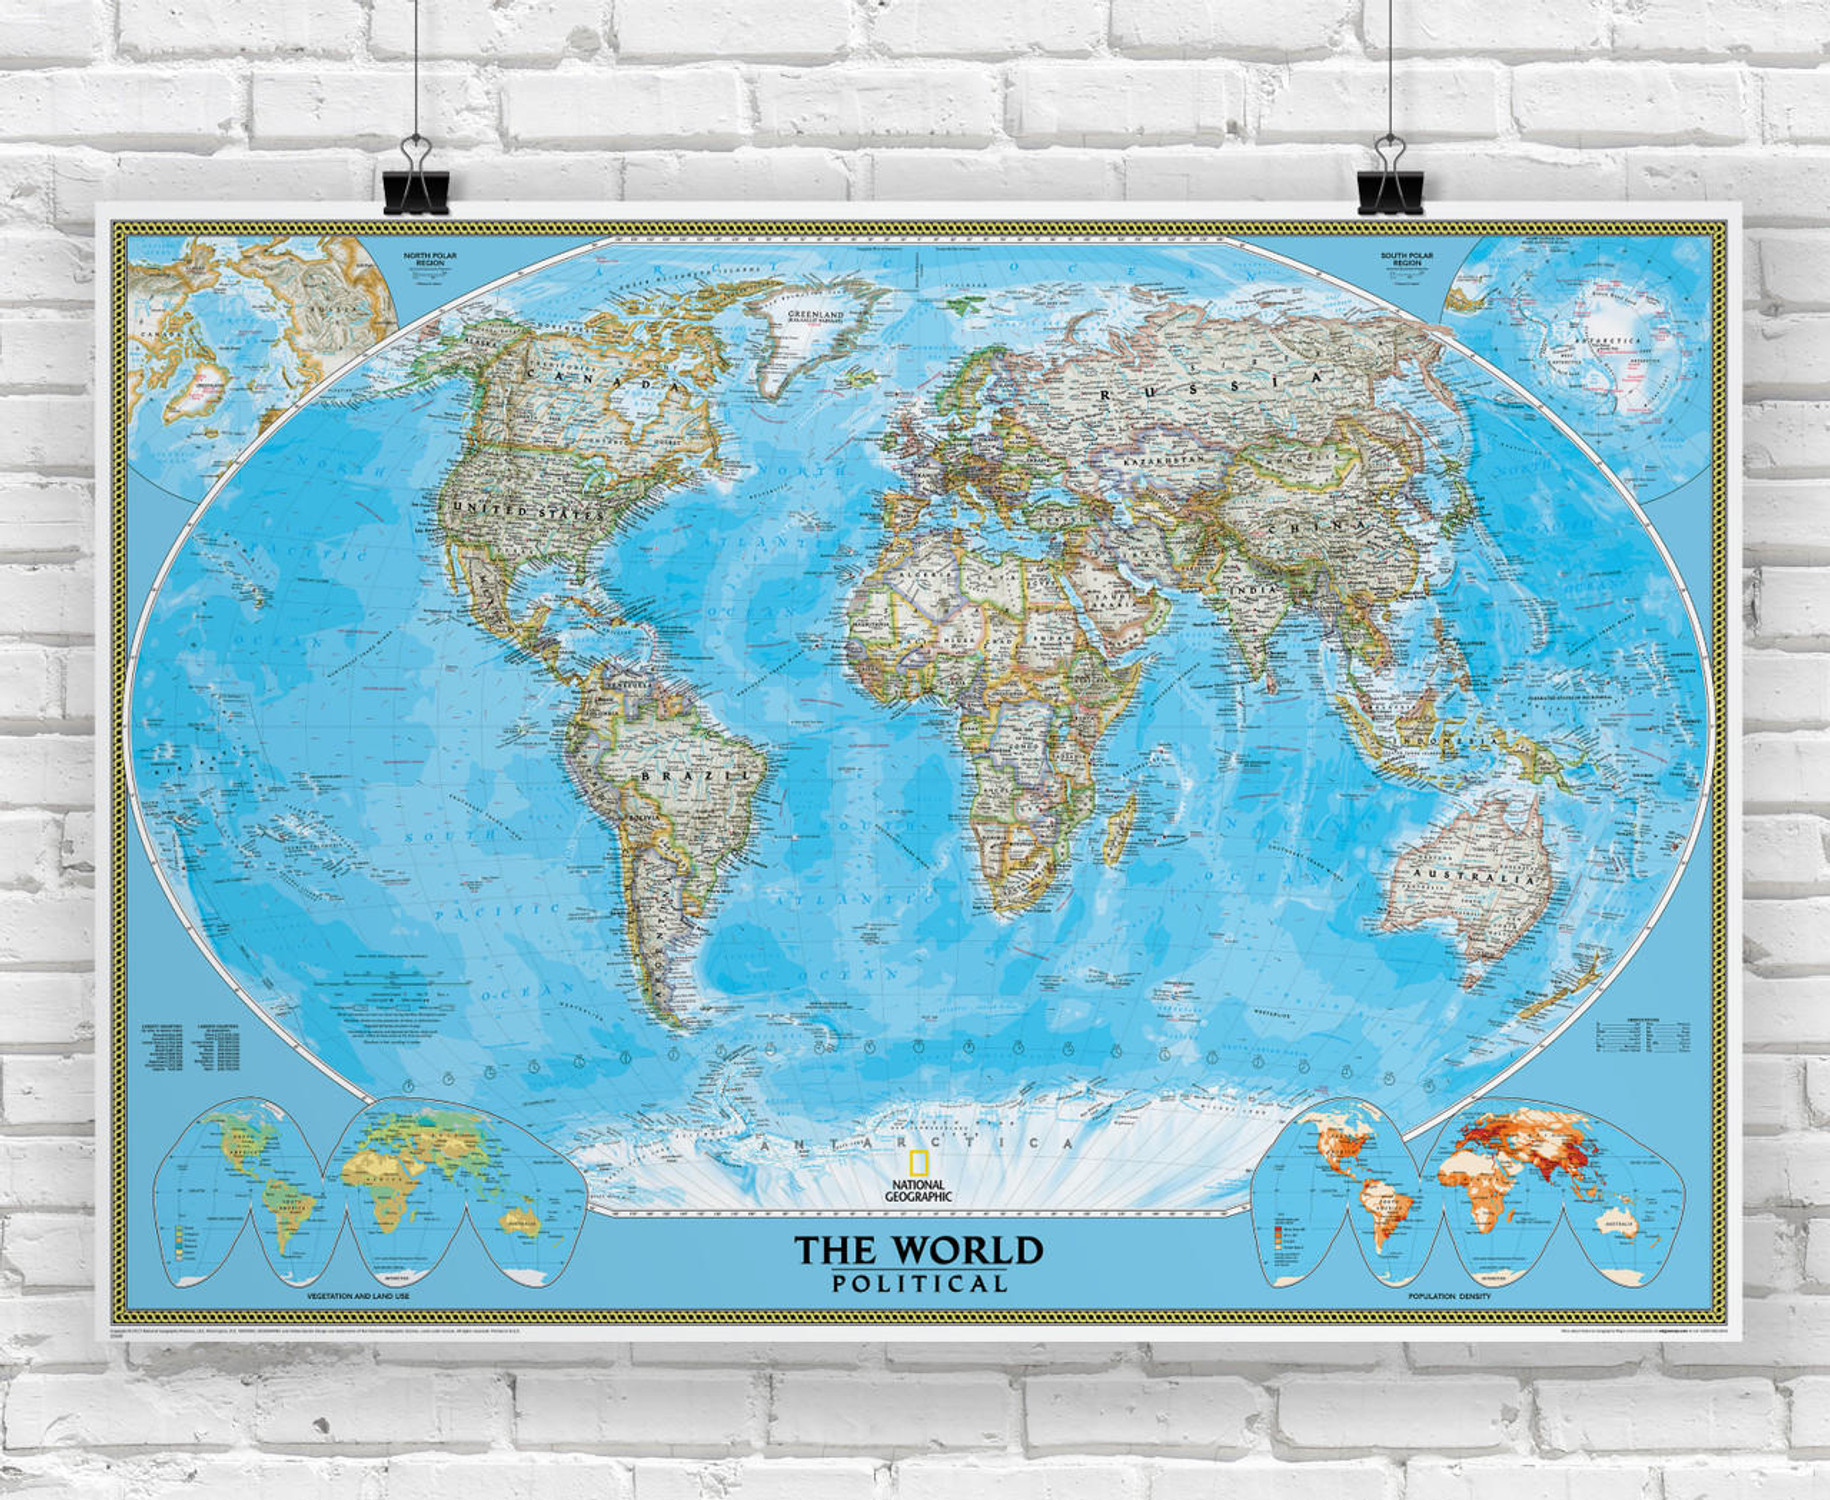 National Geographic World Classic Political Wall Map, image 1, World Maps Online